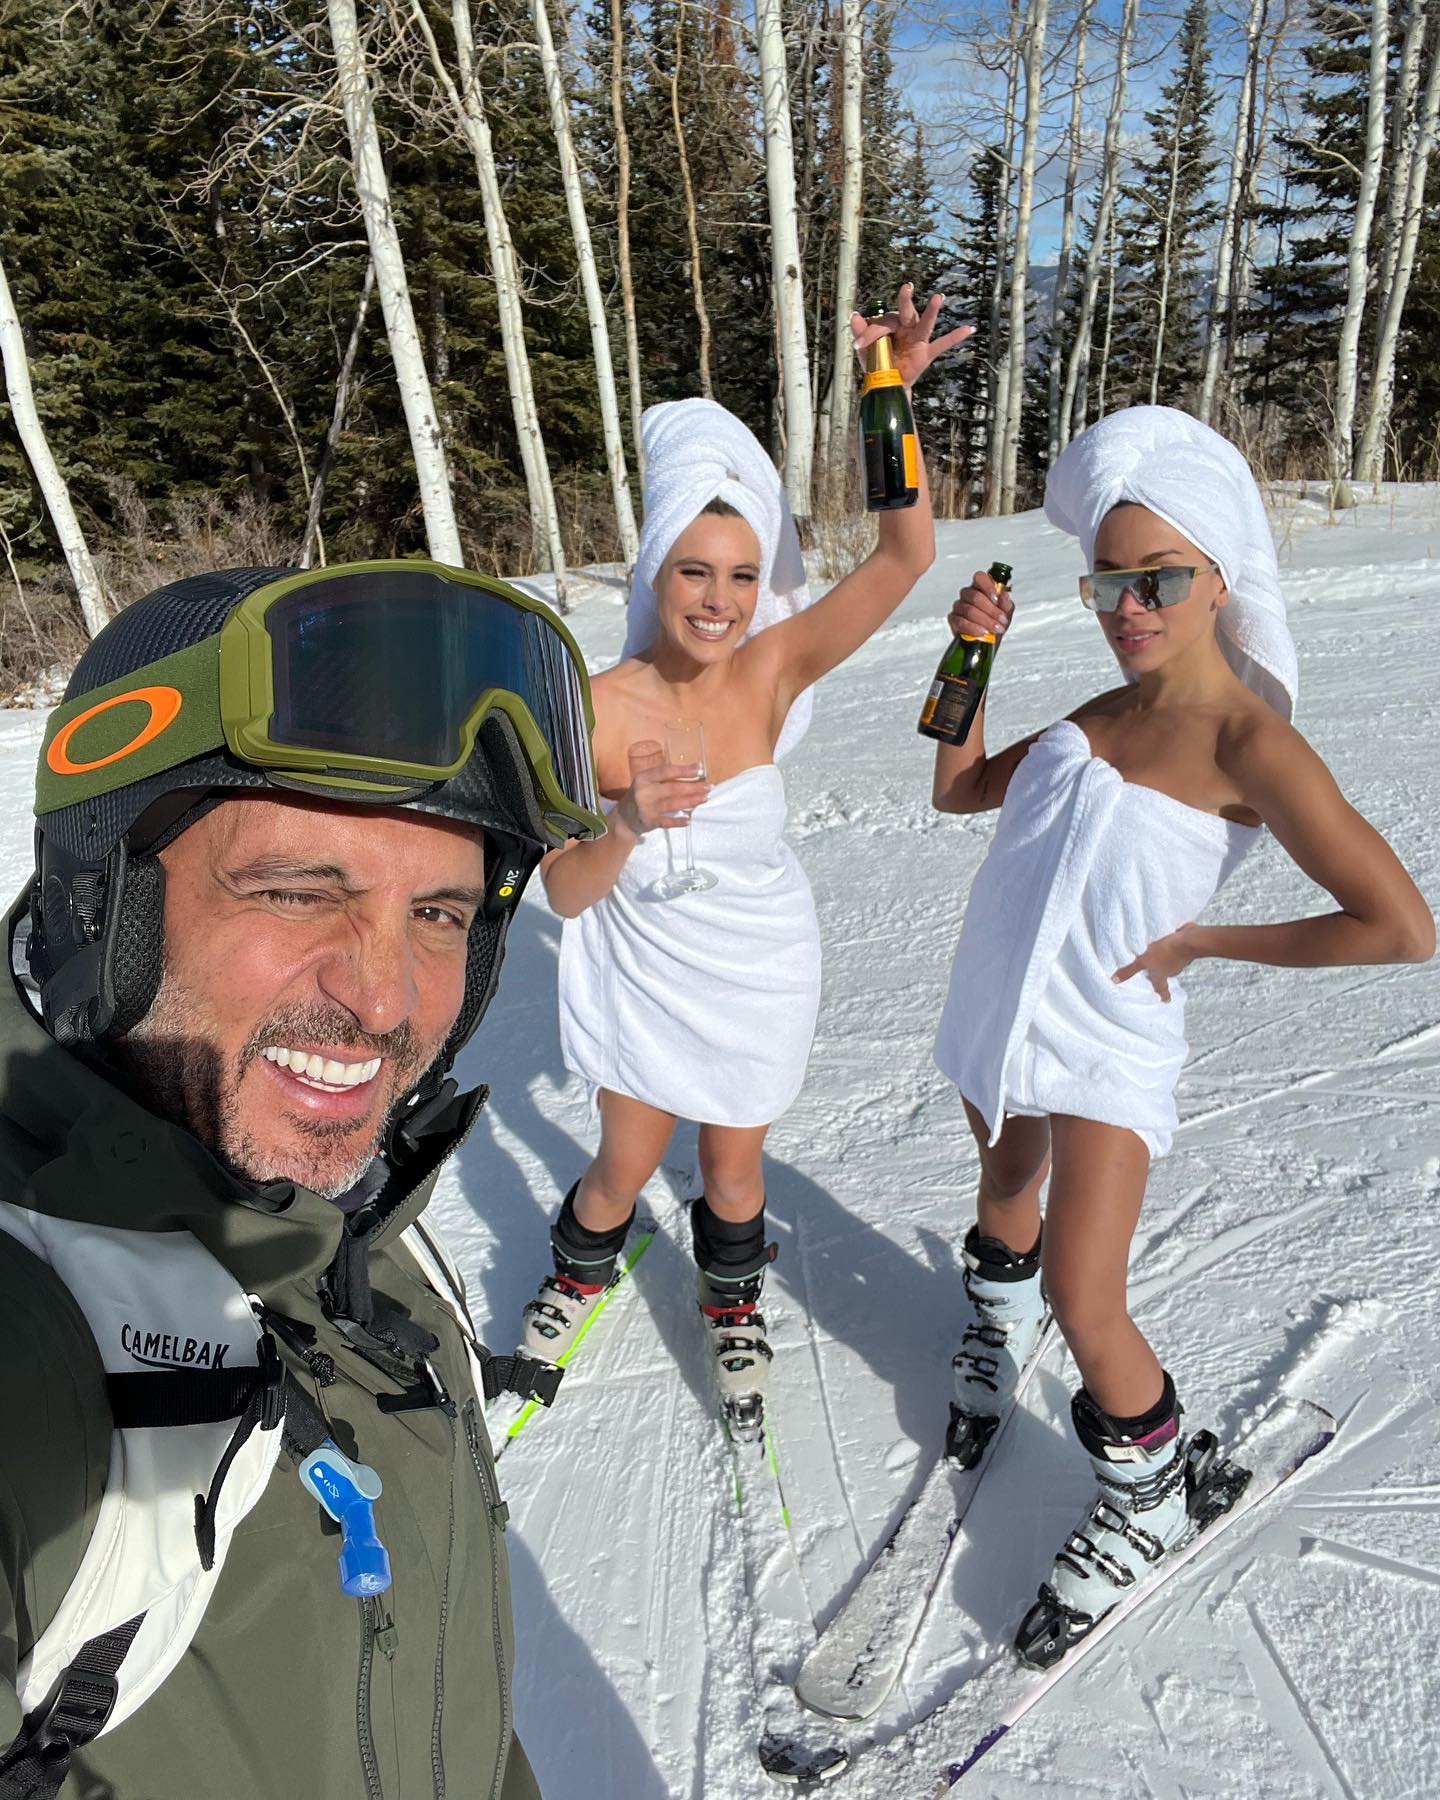 Lele and Anitta went skiing with Mauricio while only wearing towels